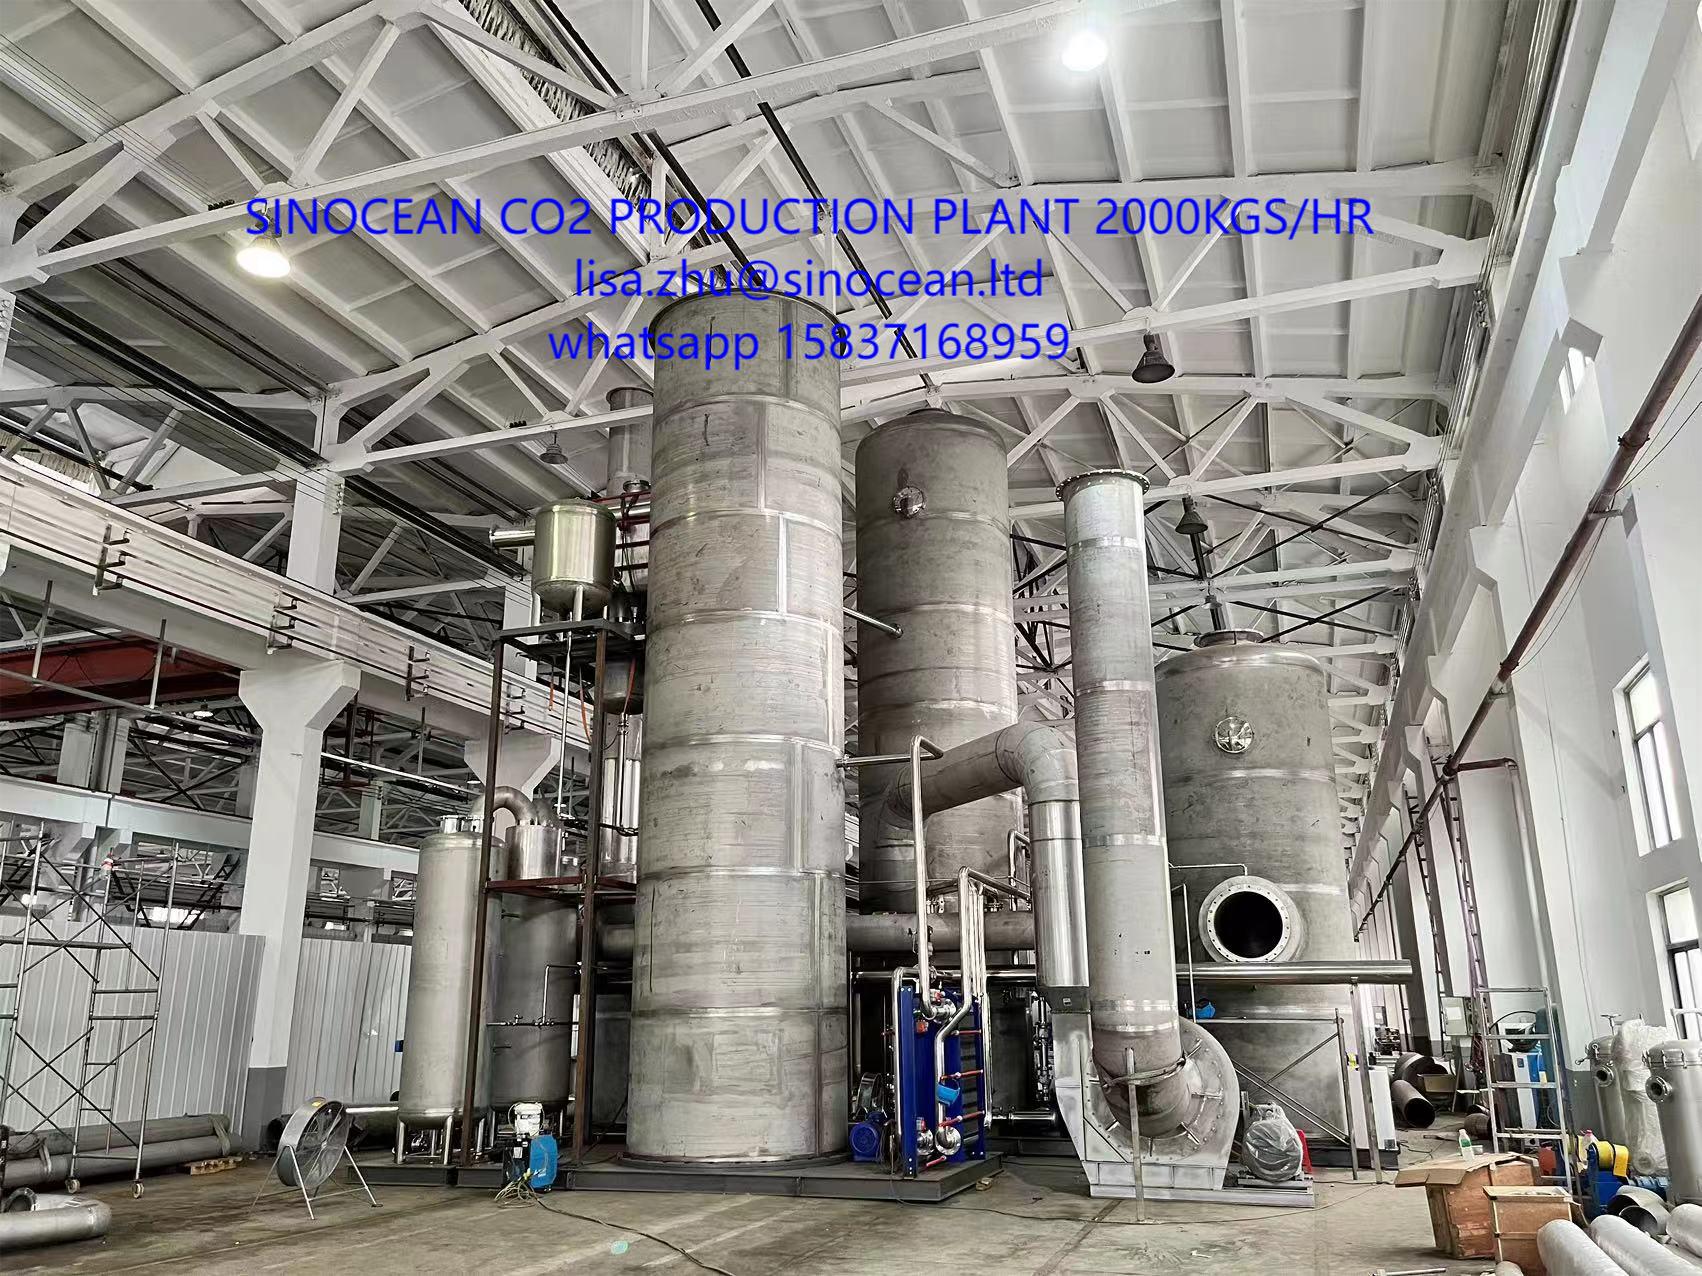 SINOCEAN CO2 PRODUCTION PLANTS EXPORTED TO OMAN